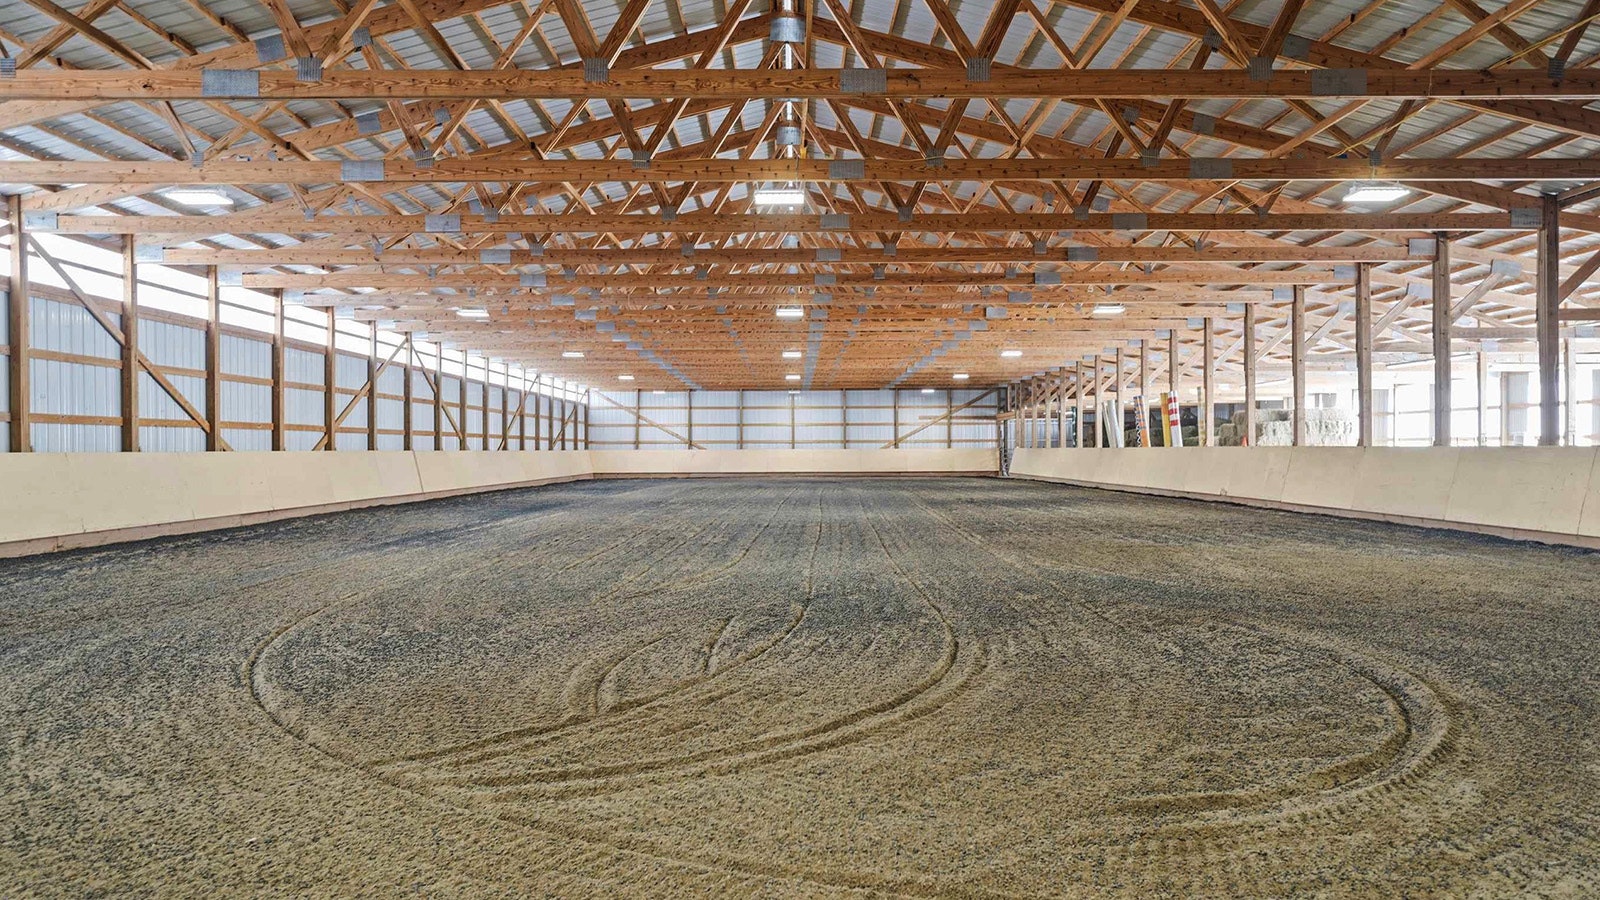 The real estate specialization niche of horse properties is something that's especially helpful in rural states like Wyoming, where homebuyers are looking for more than great living ammenities for themselves. They're also looking for their horses. This property also features a large hay barn, arena and other tack and on-site living areas to care for horses.